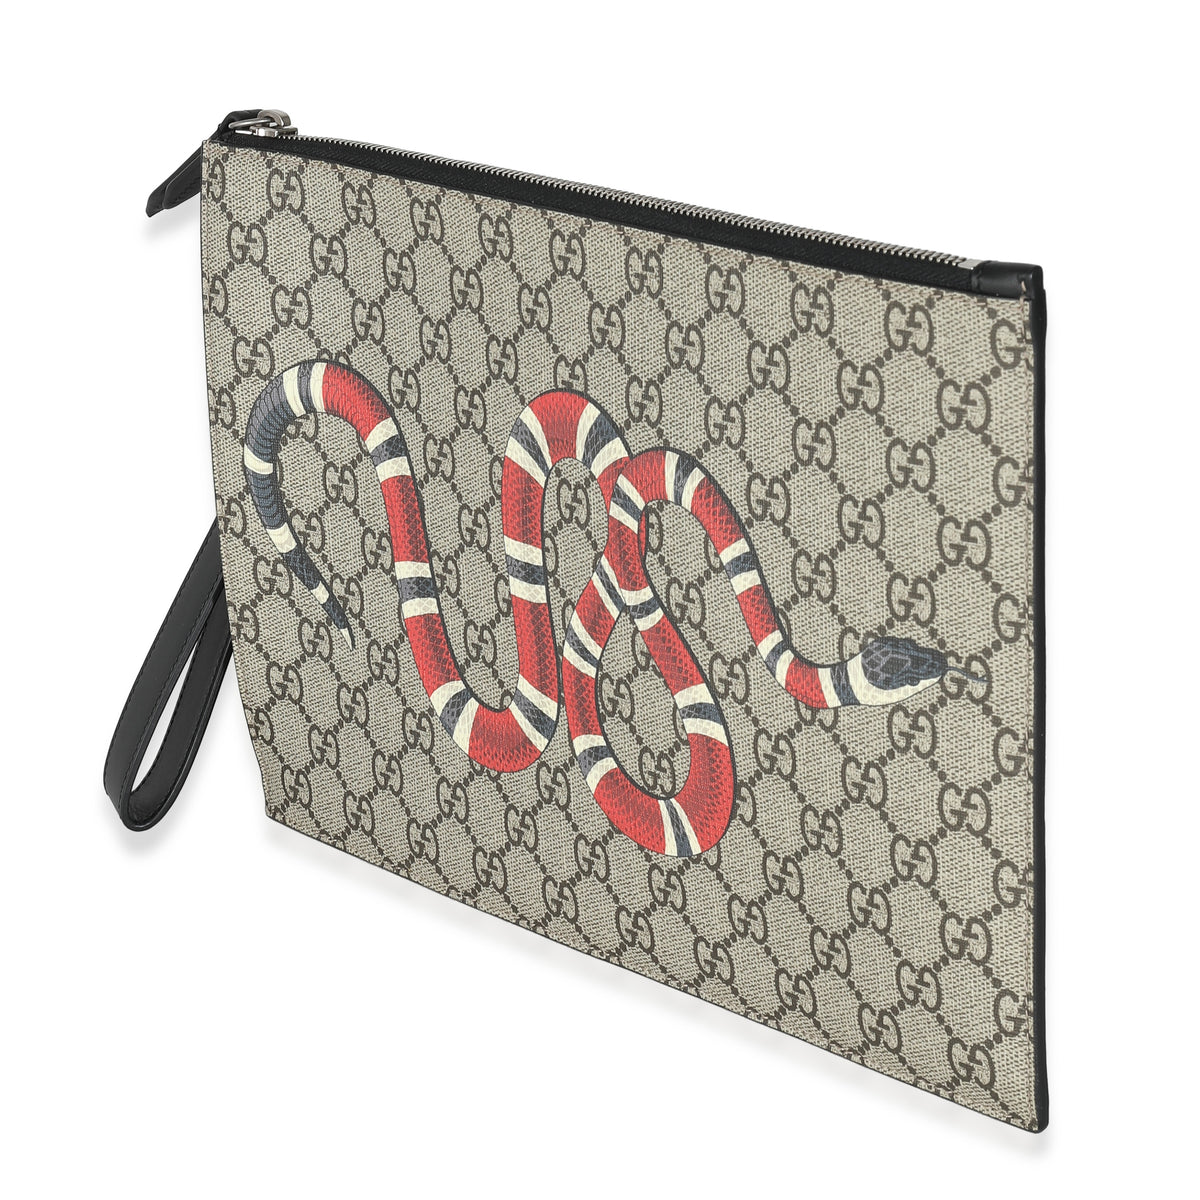 Beige GG Supreme Canvas Kingsnake Pouch